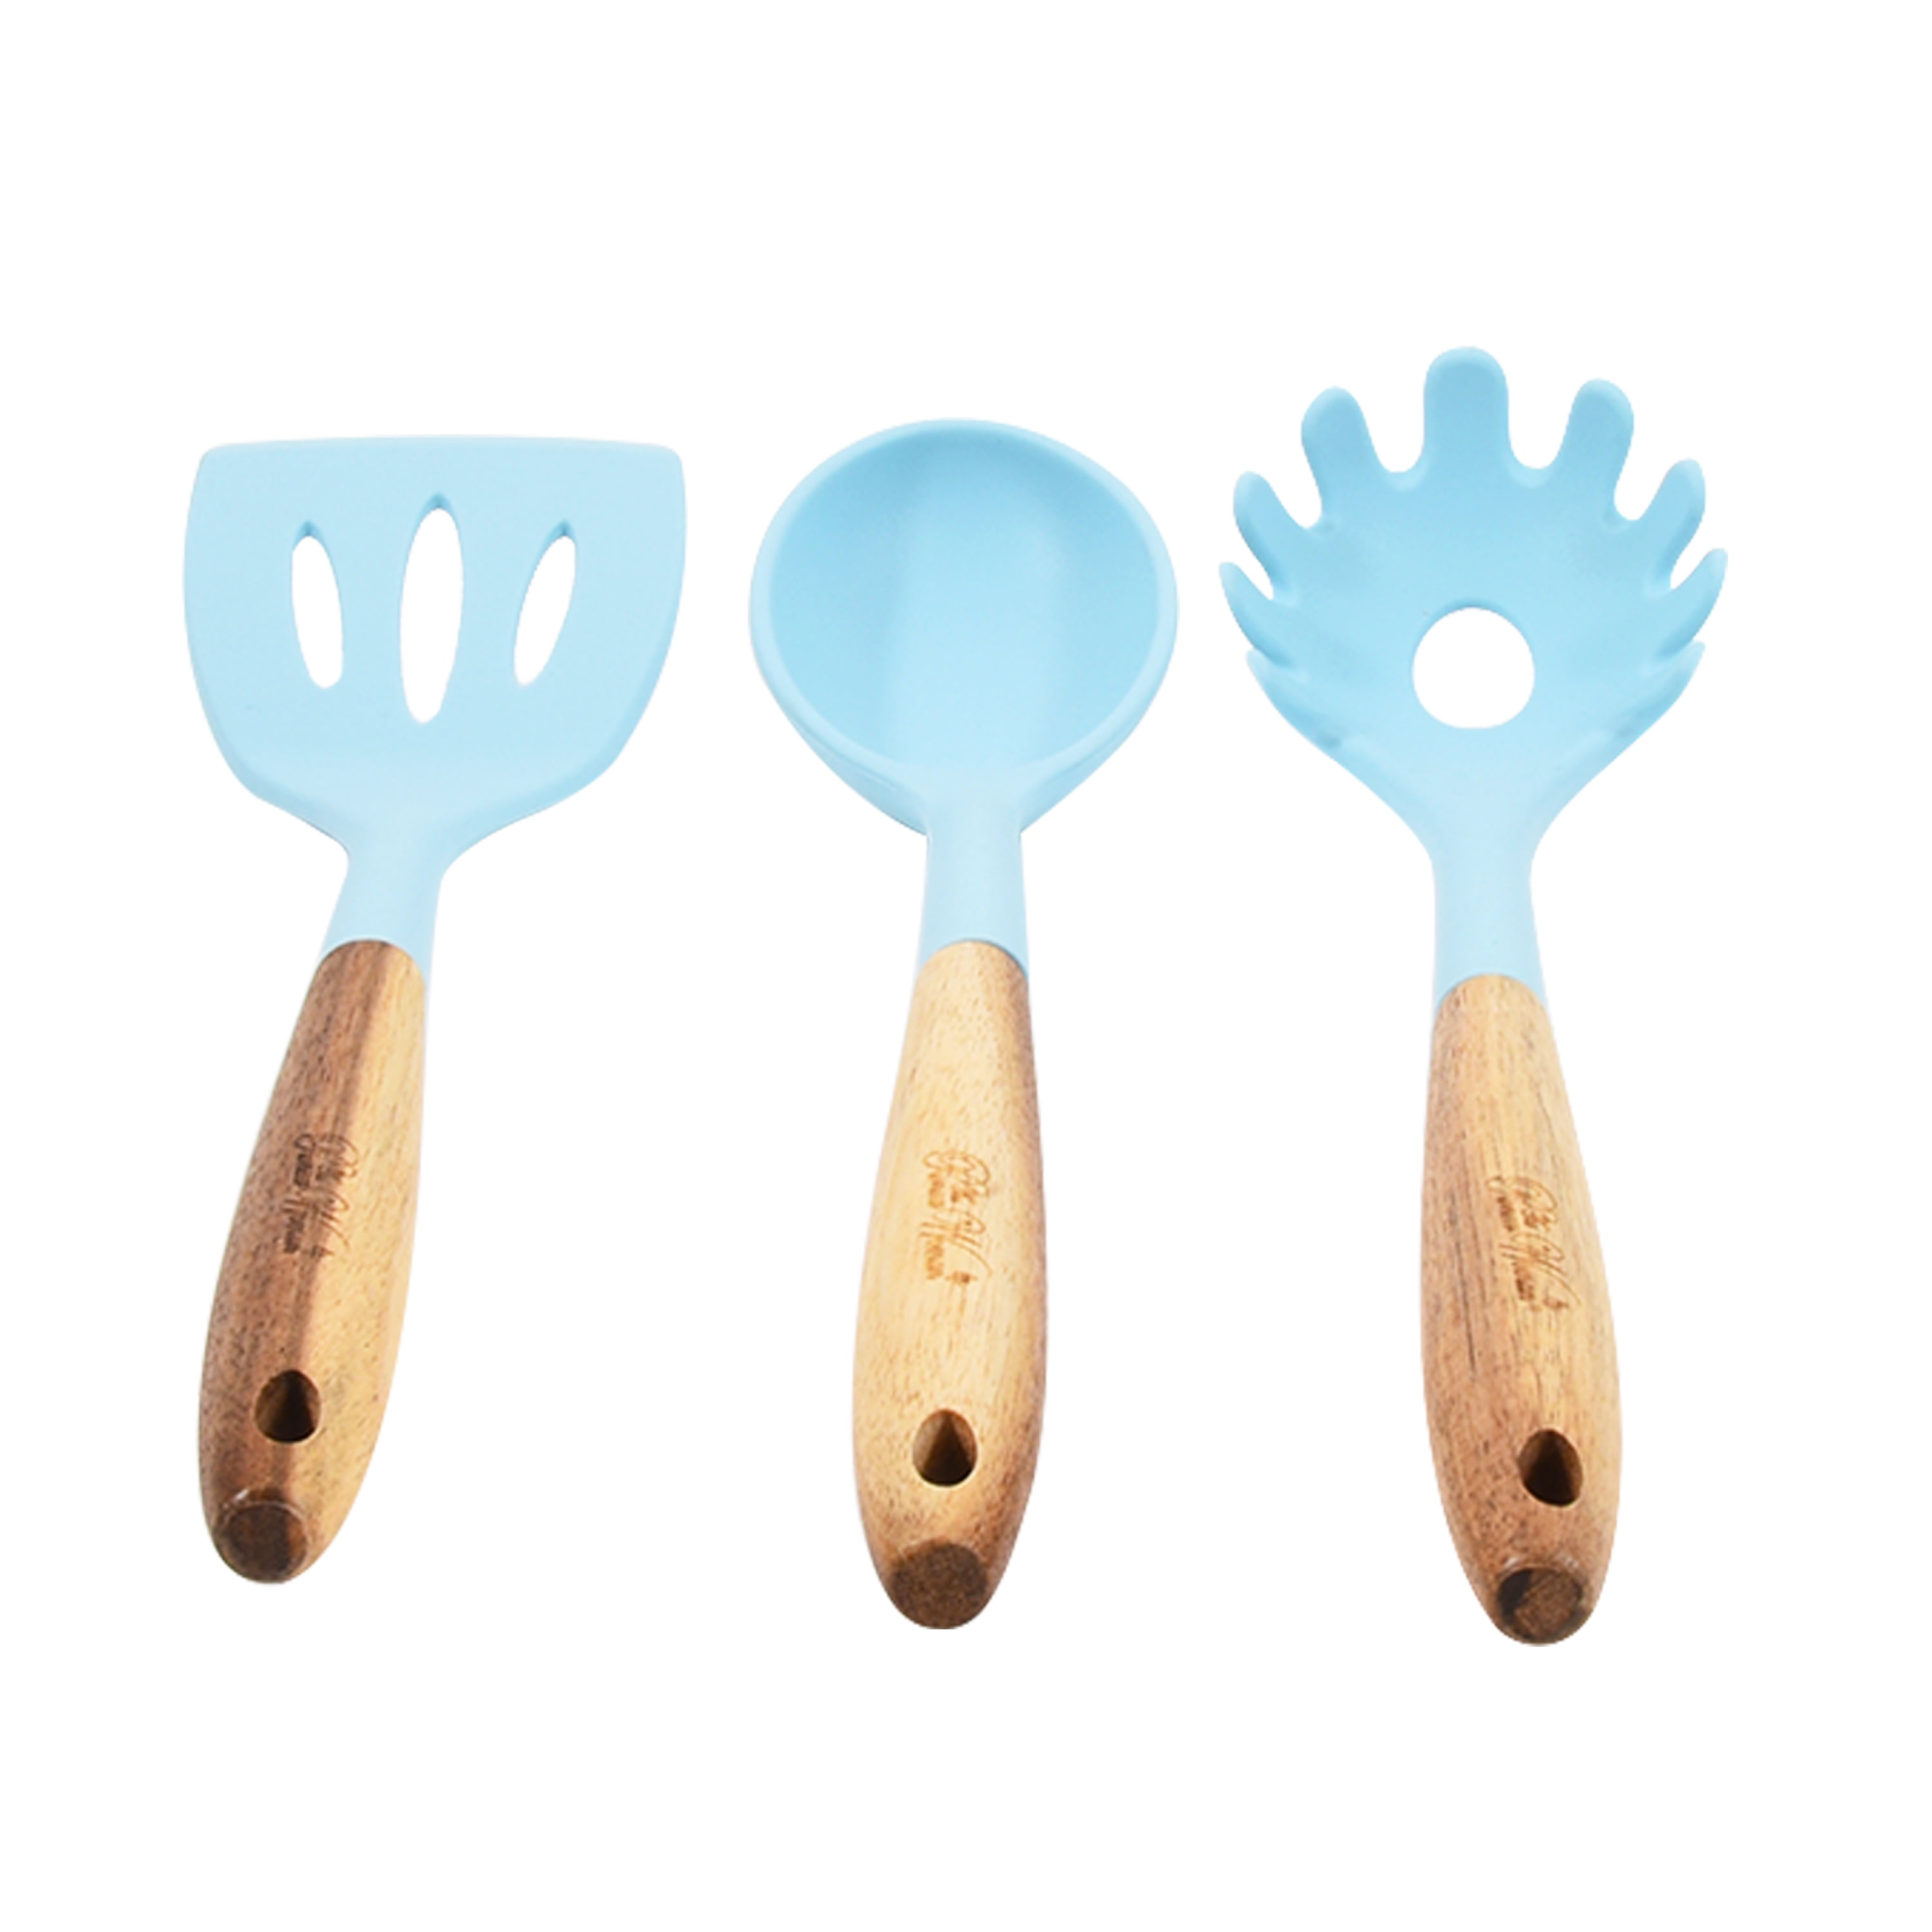  The Pioneer Woman Cowboy Rustic 3-Piece Silicone Head Utensil  Set with Acacia Wood Handle, Turquoise/Blue : Home & Kitchen